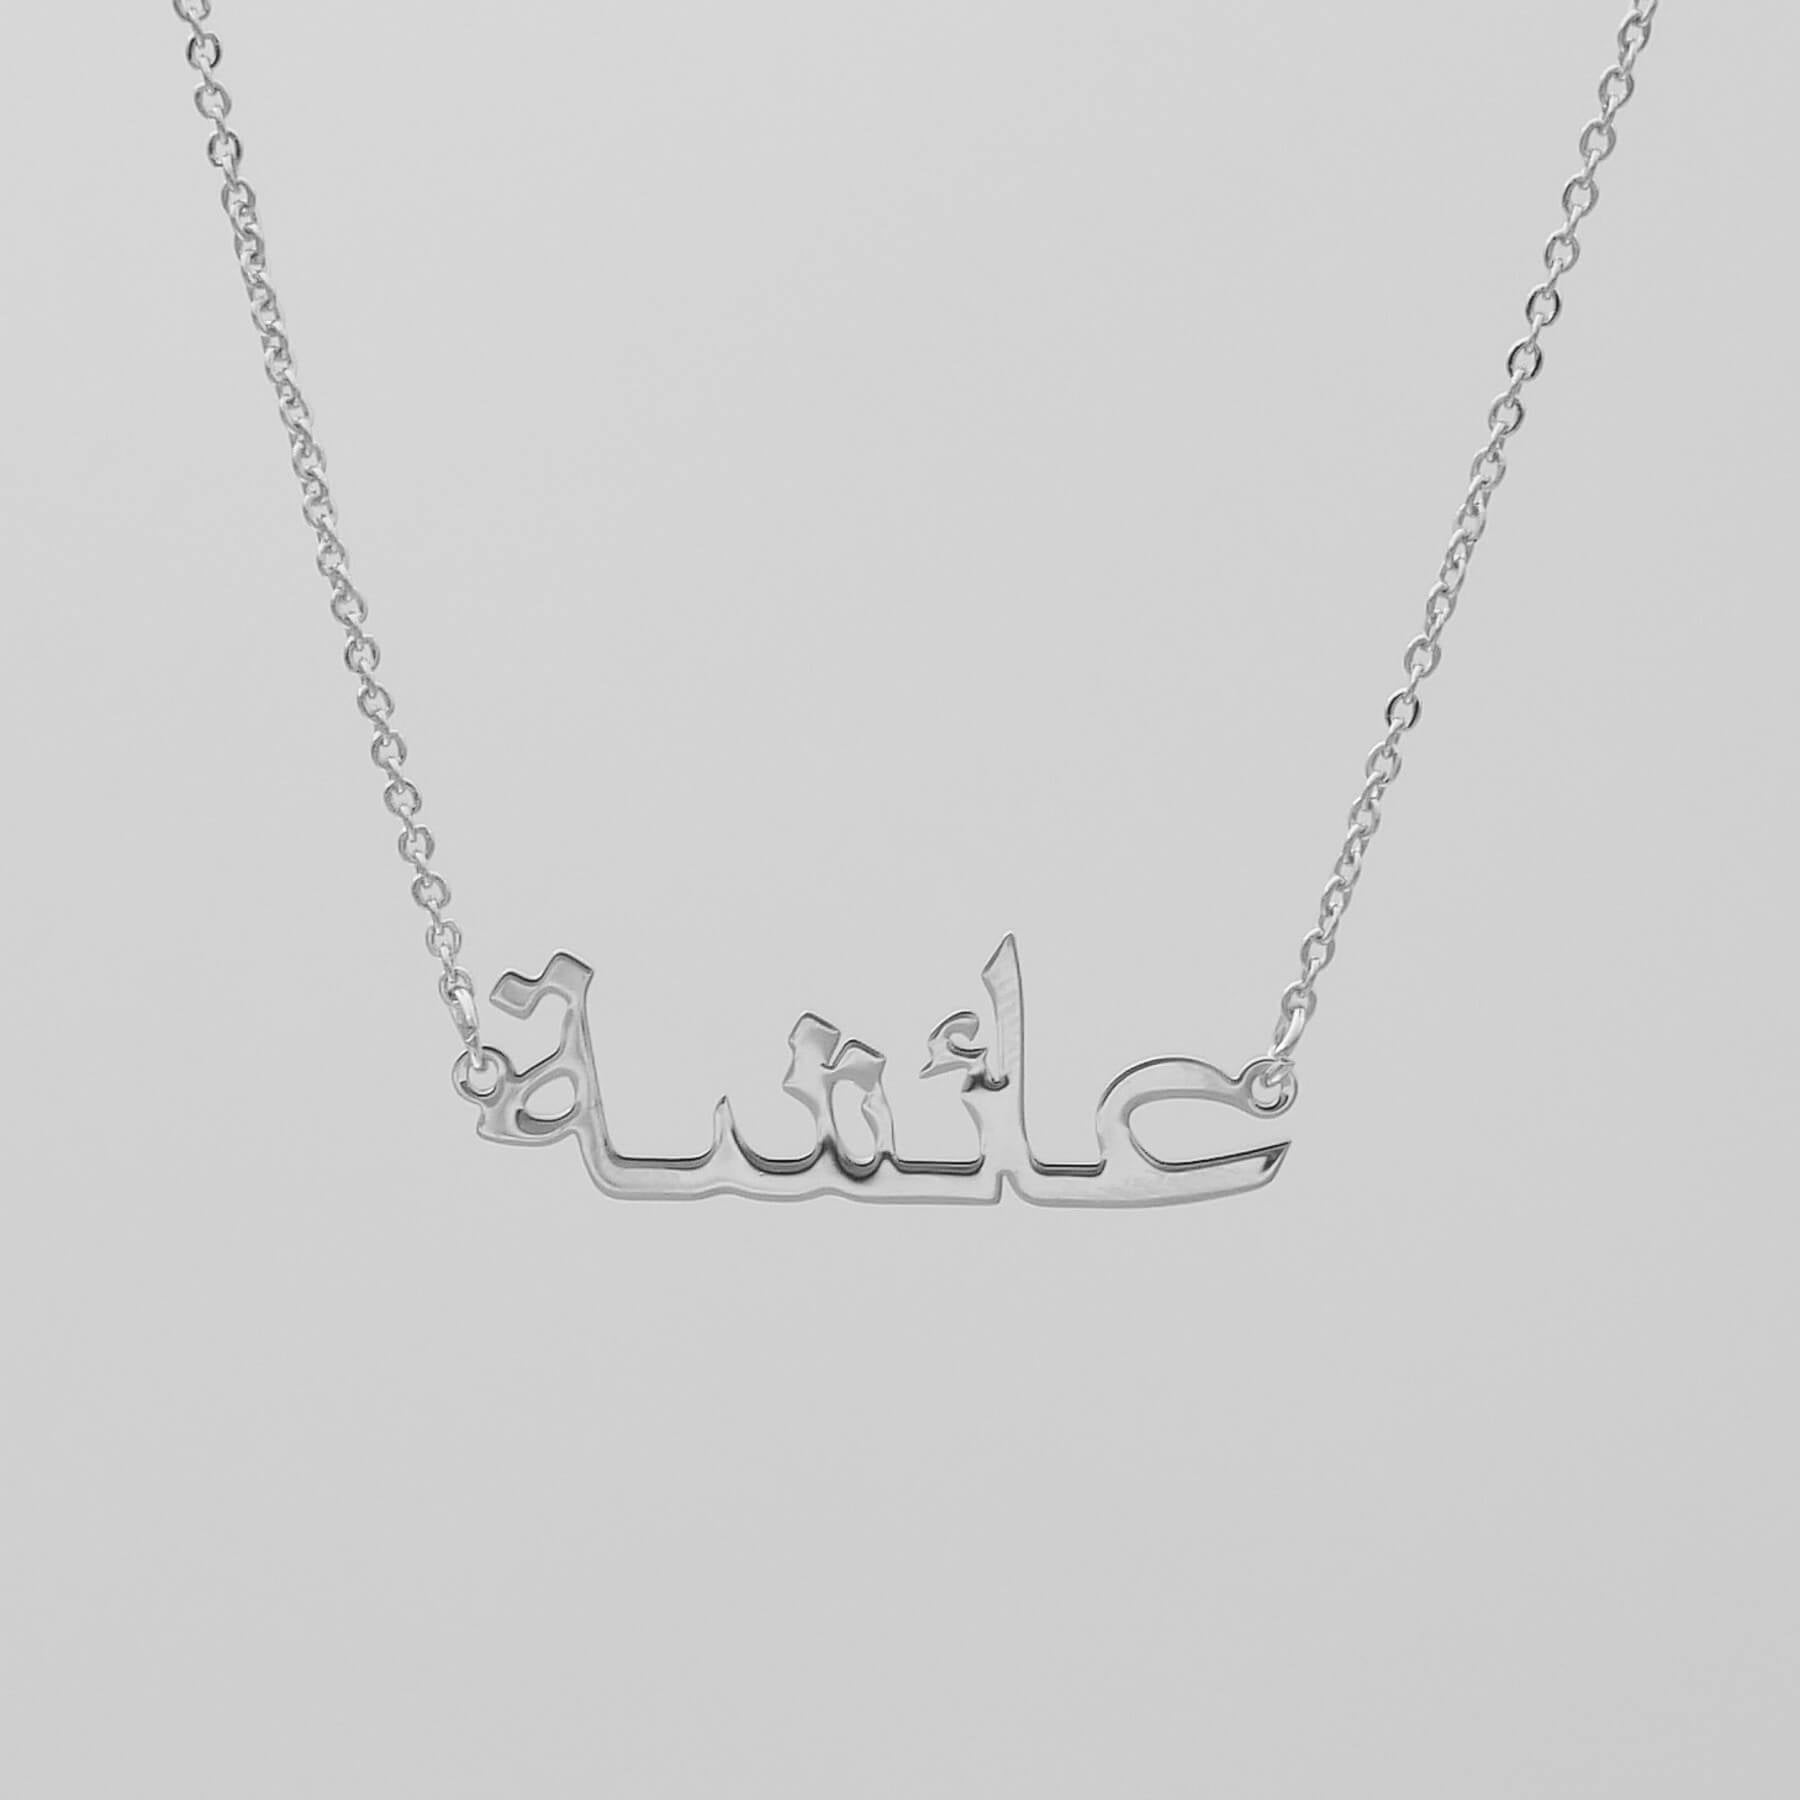 Silver custom Arabic name necklace with a classic link chain from PRYA jewellery personalised UK